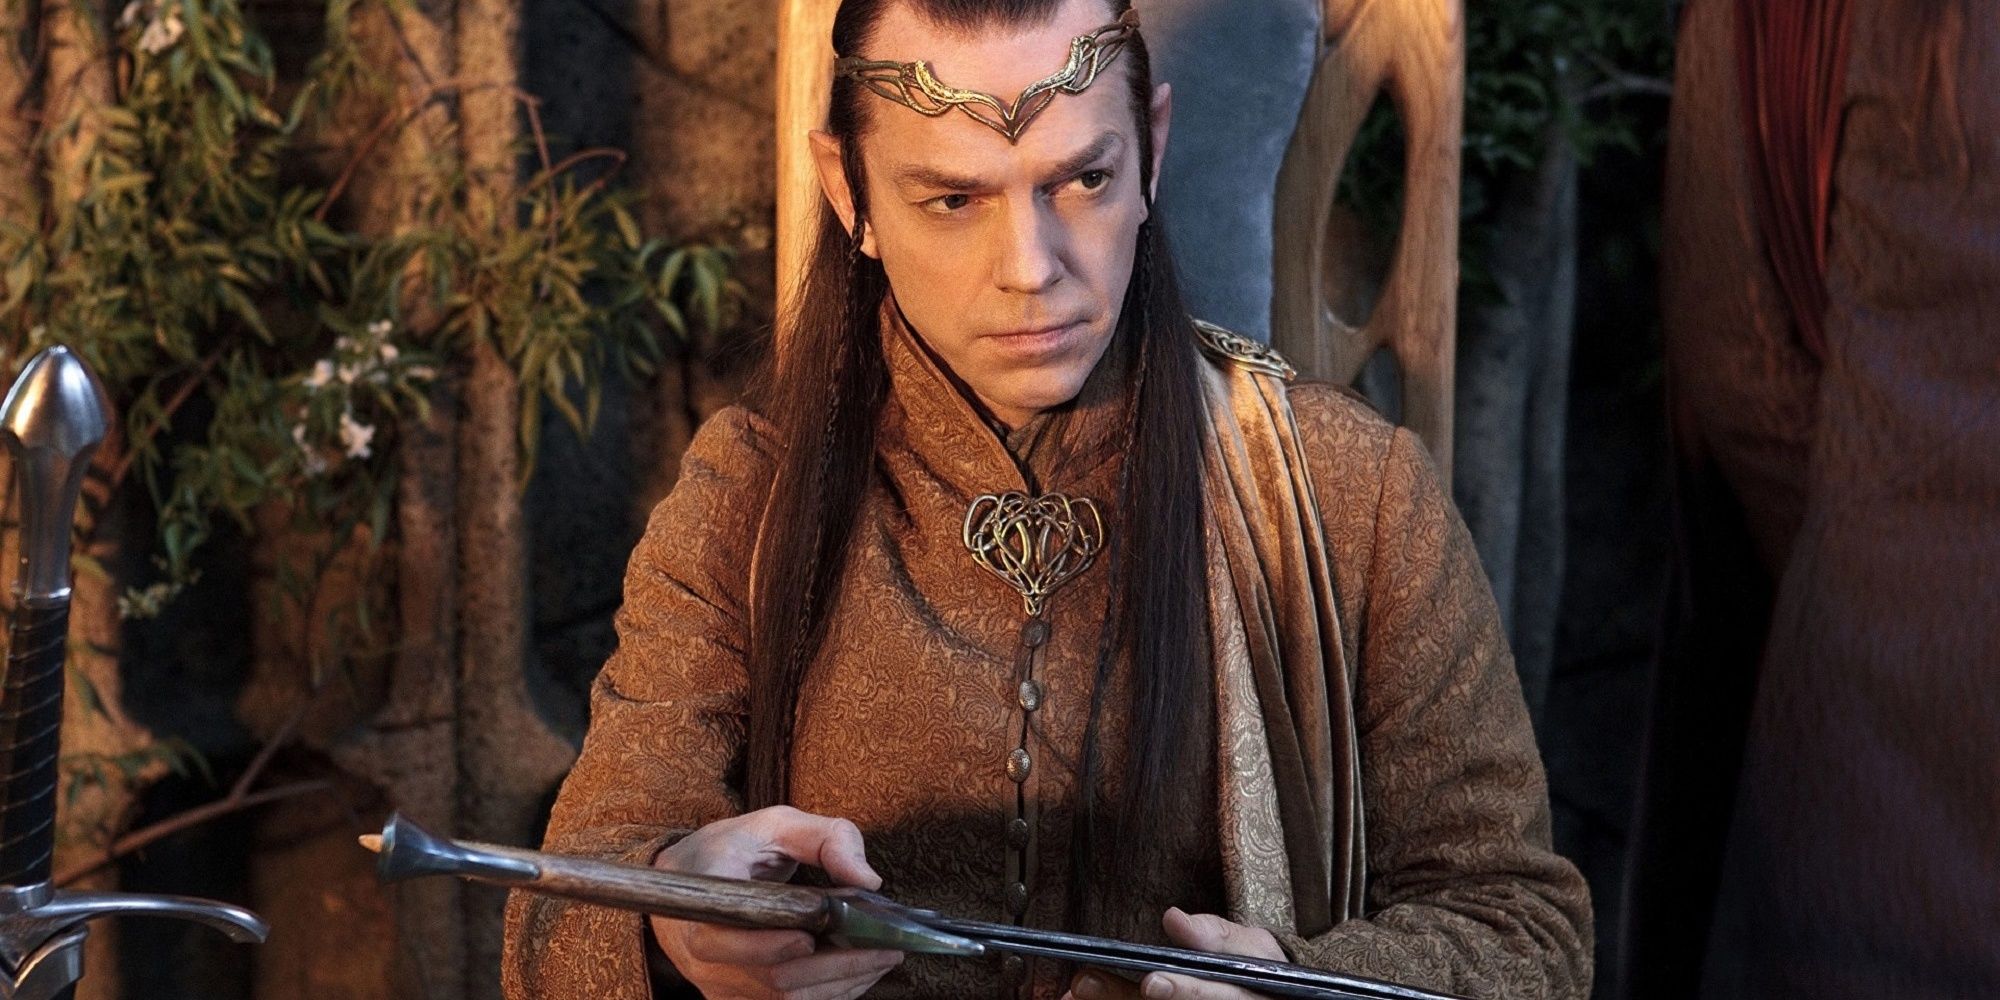 Elrond handing over his sword in Rivendell in The Lord of the Rings: The Fellowship of the Ring